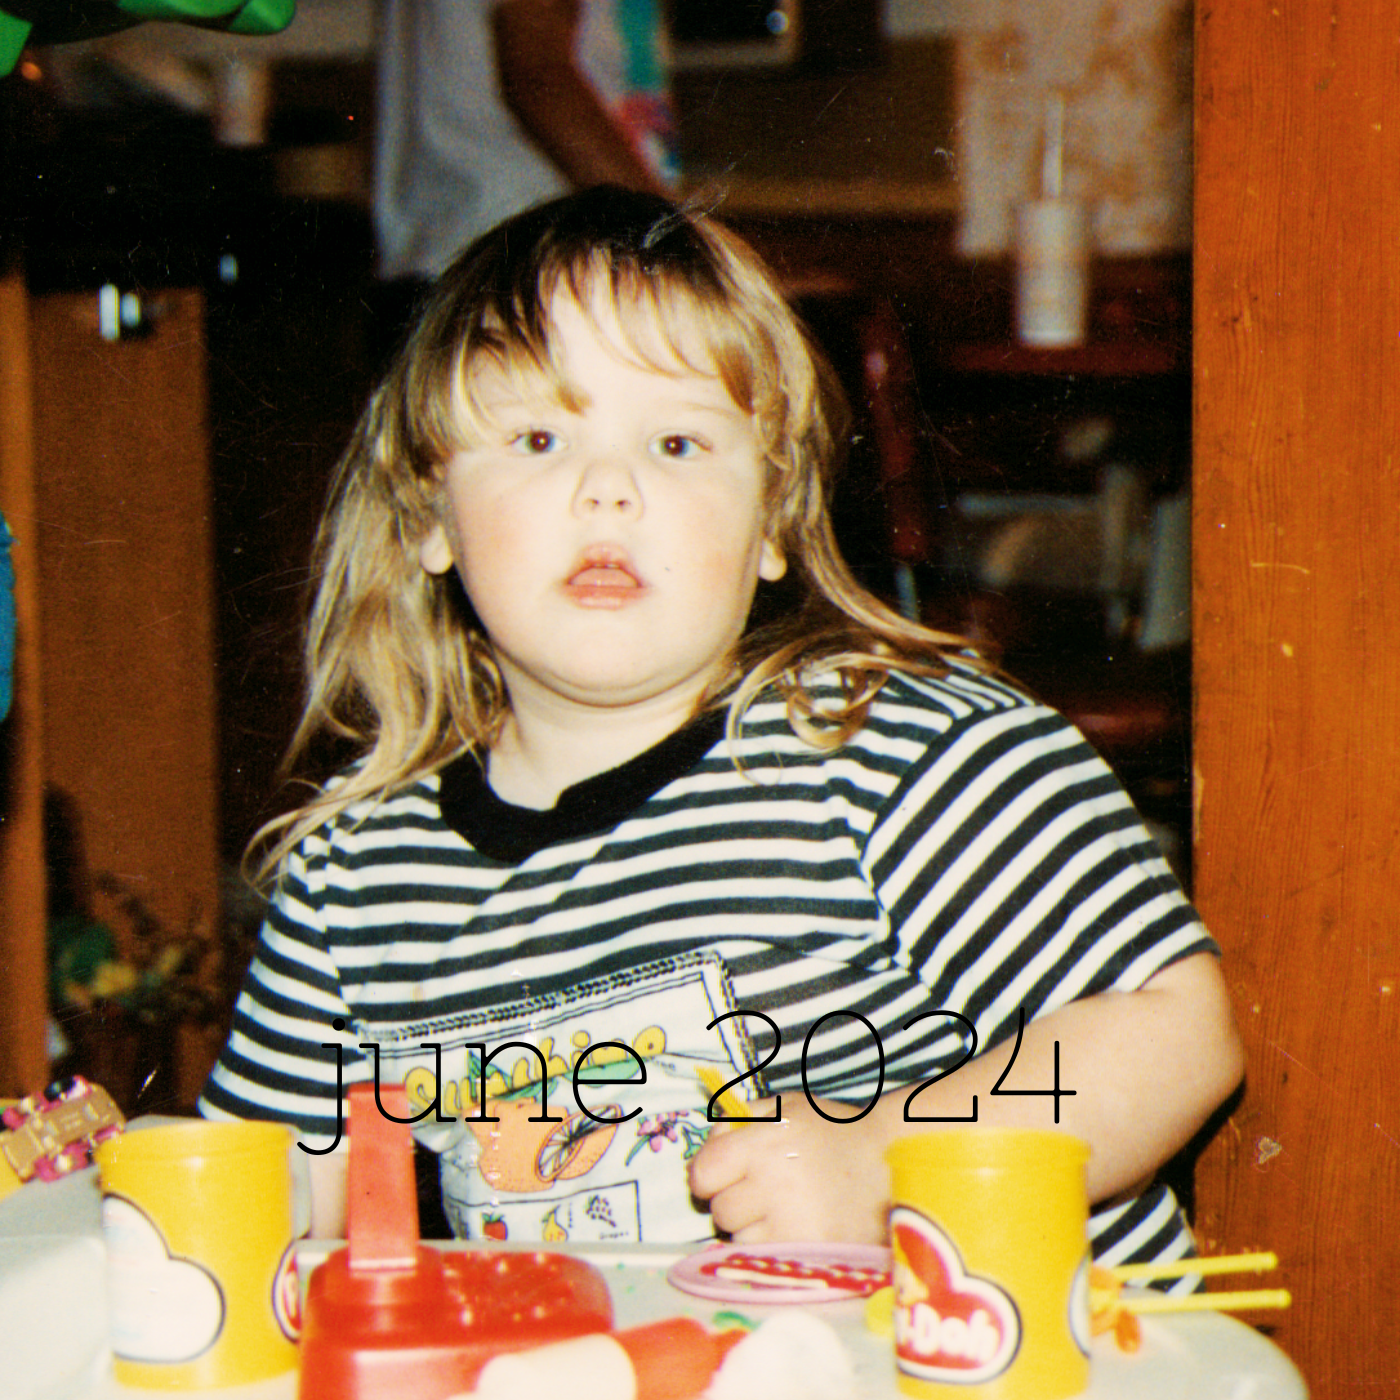 a square image of a kid anywhere from age four to seven tbh with bangs and a black and white striped shirt mouth hanging open while sitting at a table full of play doh accoutrements